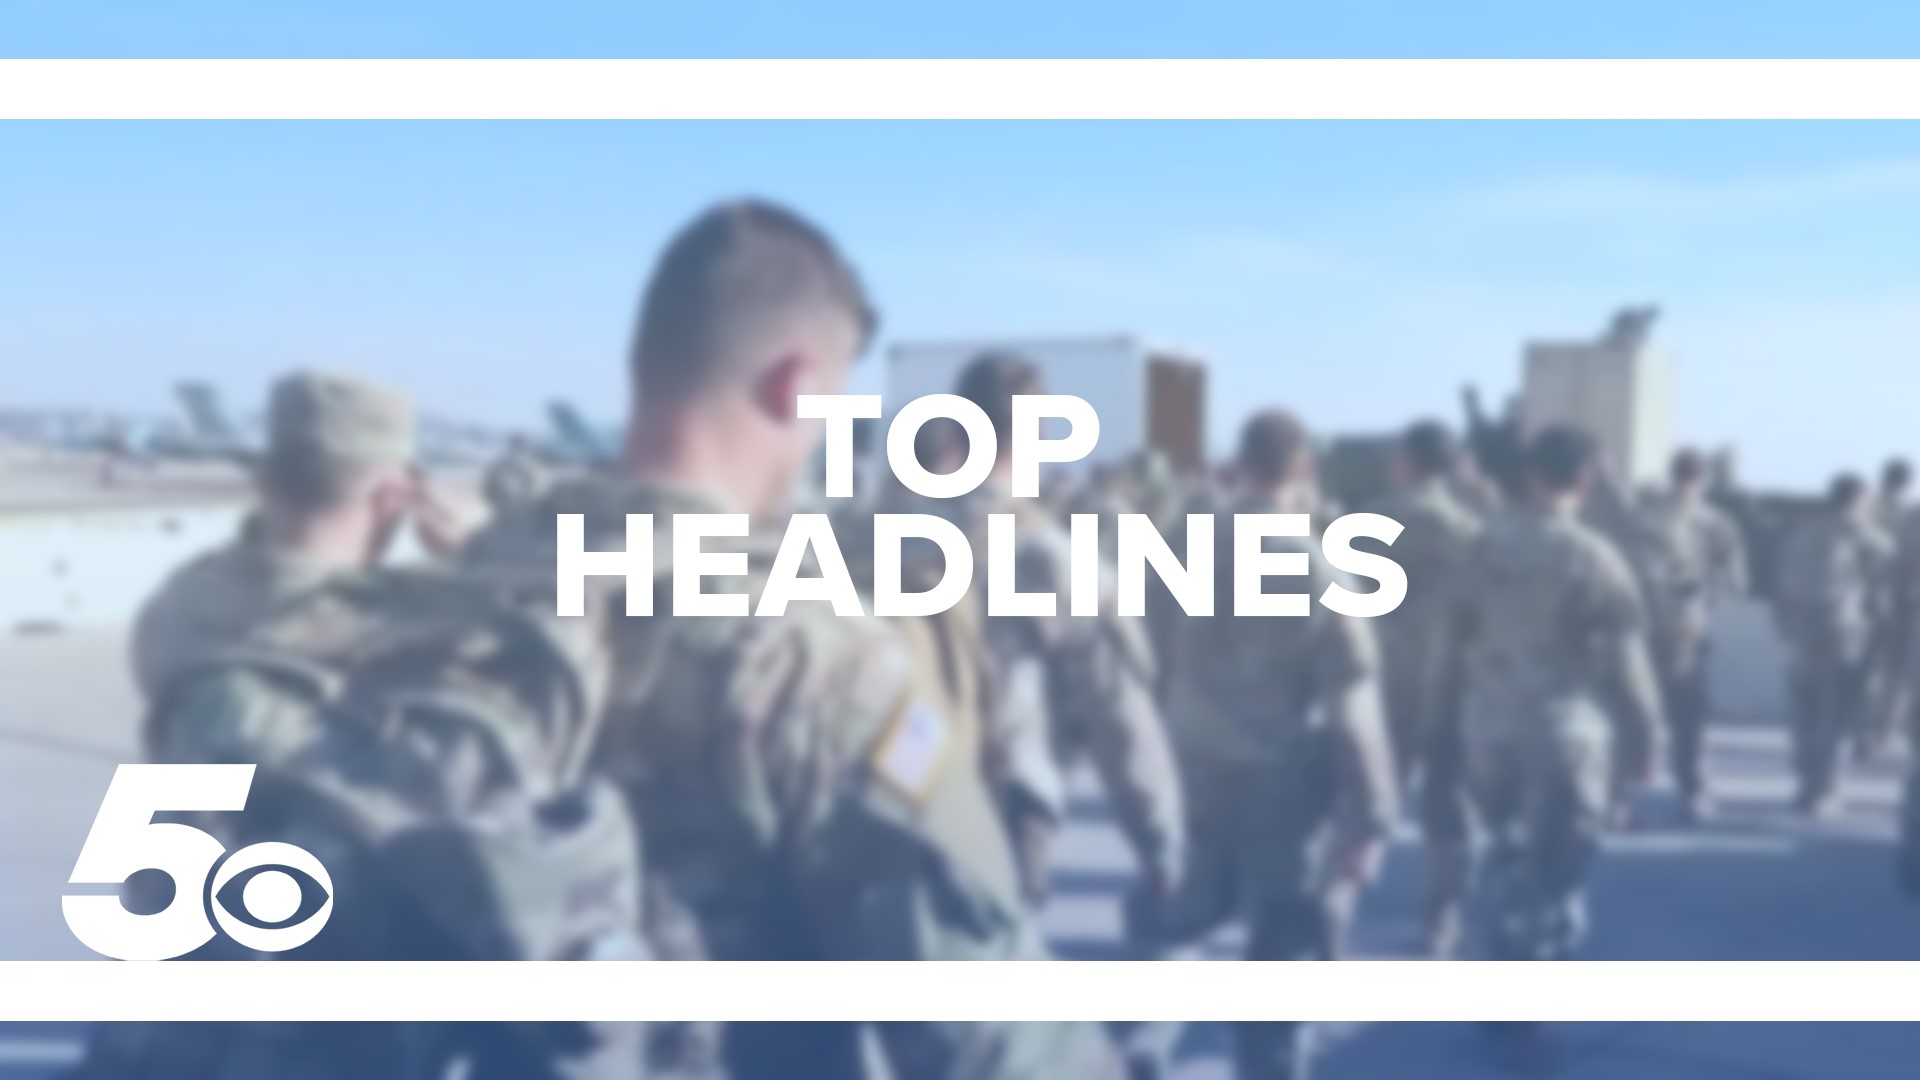 Check out today's top headlines including weather, a sendoff for Arkansas National Guard troops, July 4th safety, and more.